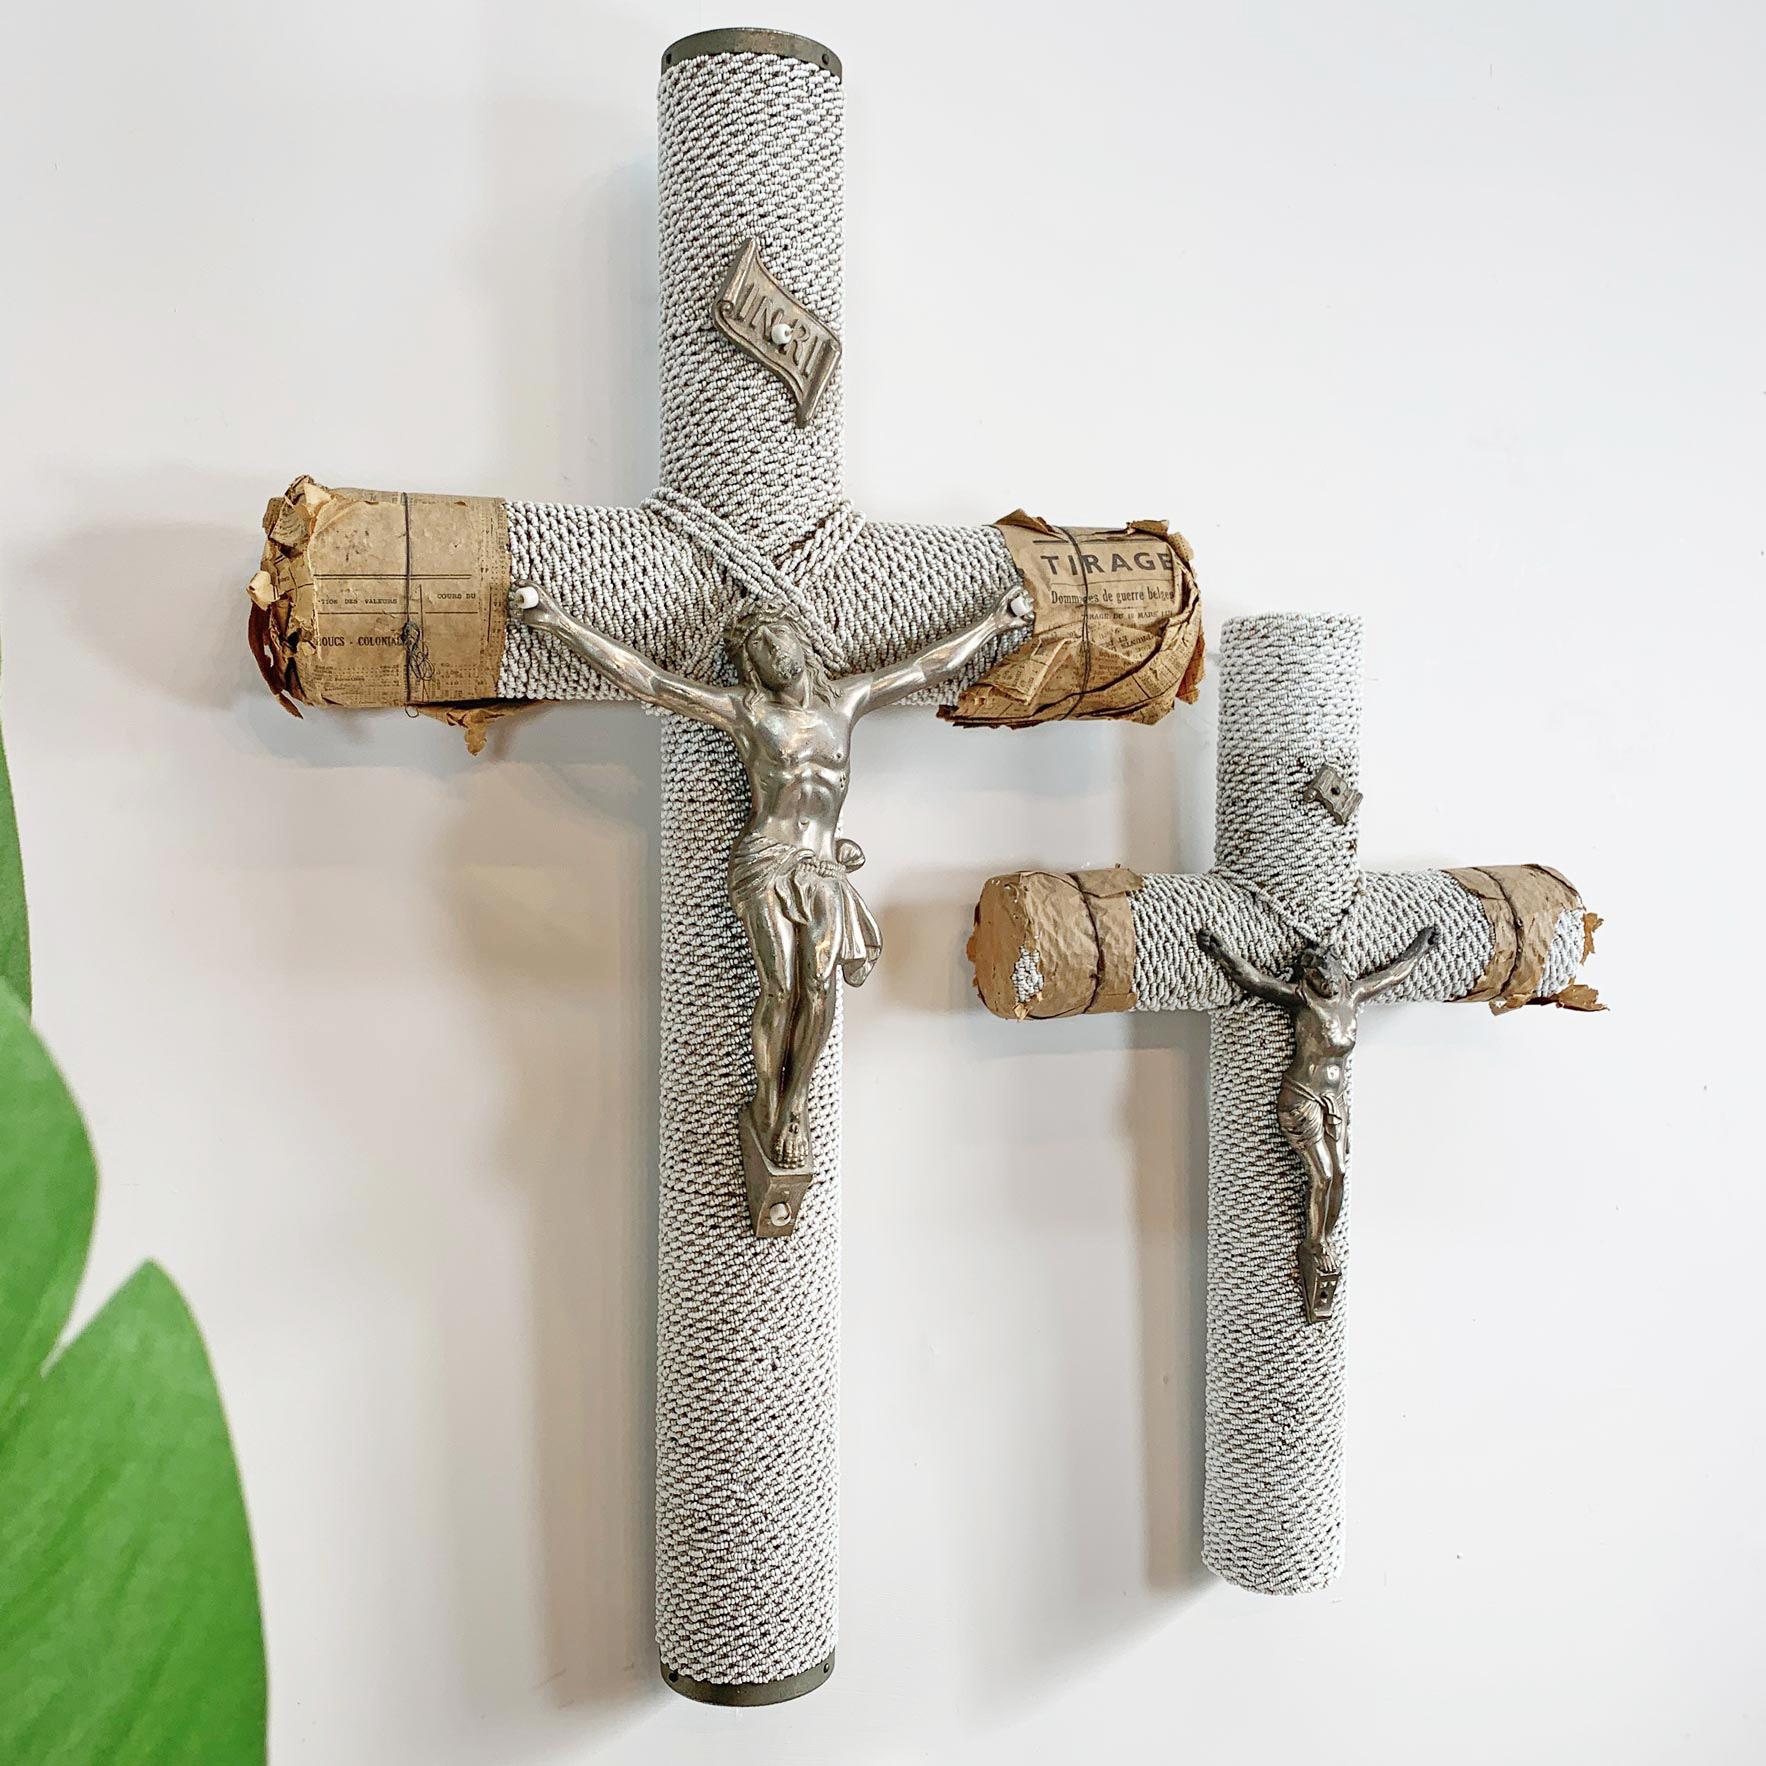 An incredible pair of 1930's French Memorial religious crucifixes, the body of each crucifix made of wood then covered in thousands of strung, hand made opaque glass beads, to the top of each there is a zinc scroll which reads INRI, and below this